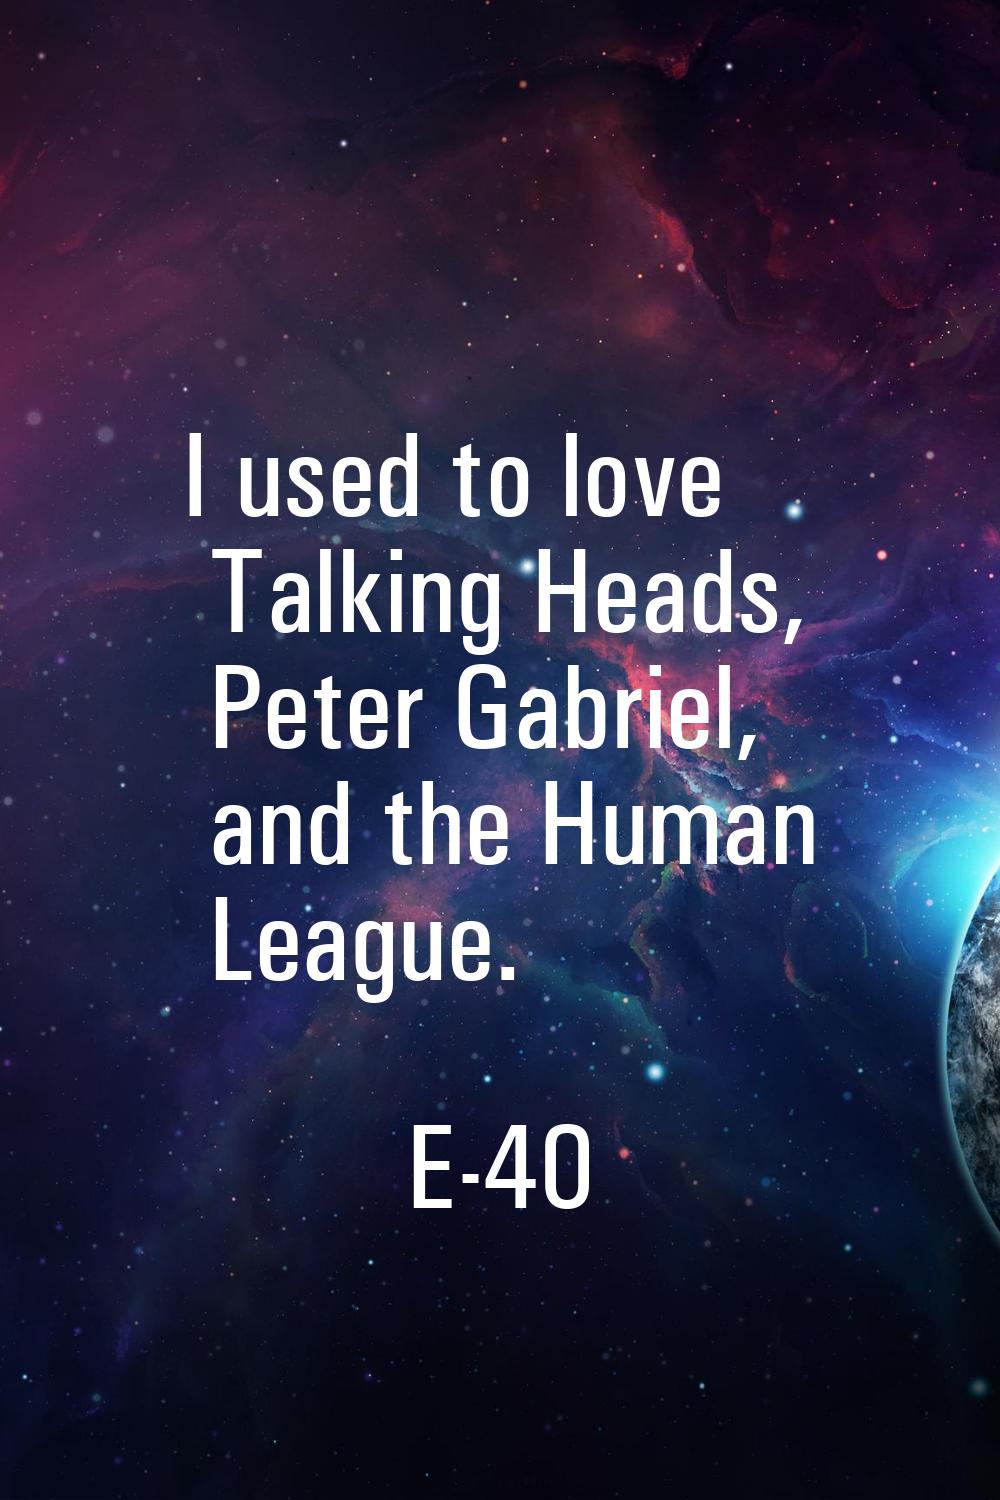 I used to love Talking Heads, Peter Gabriel, and the Human League.